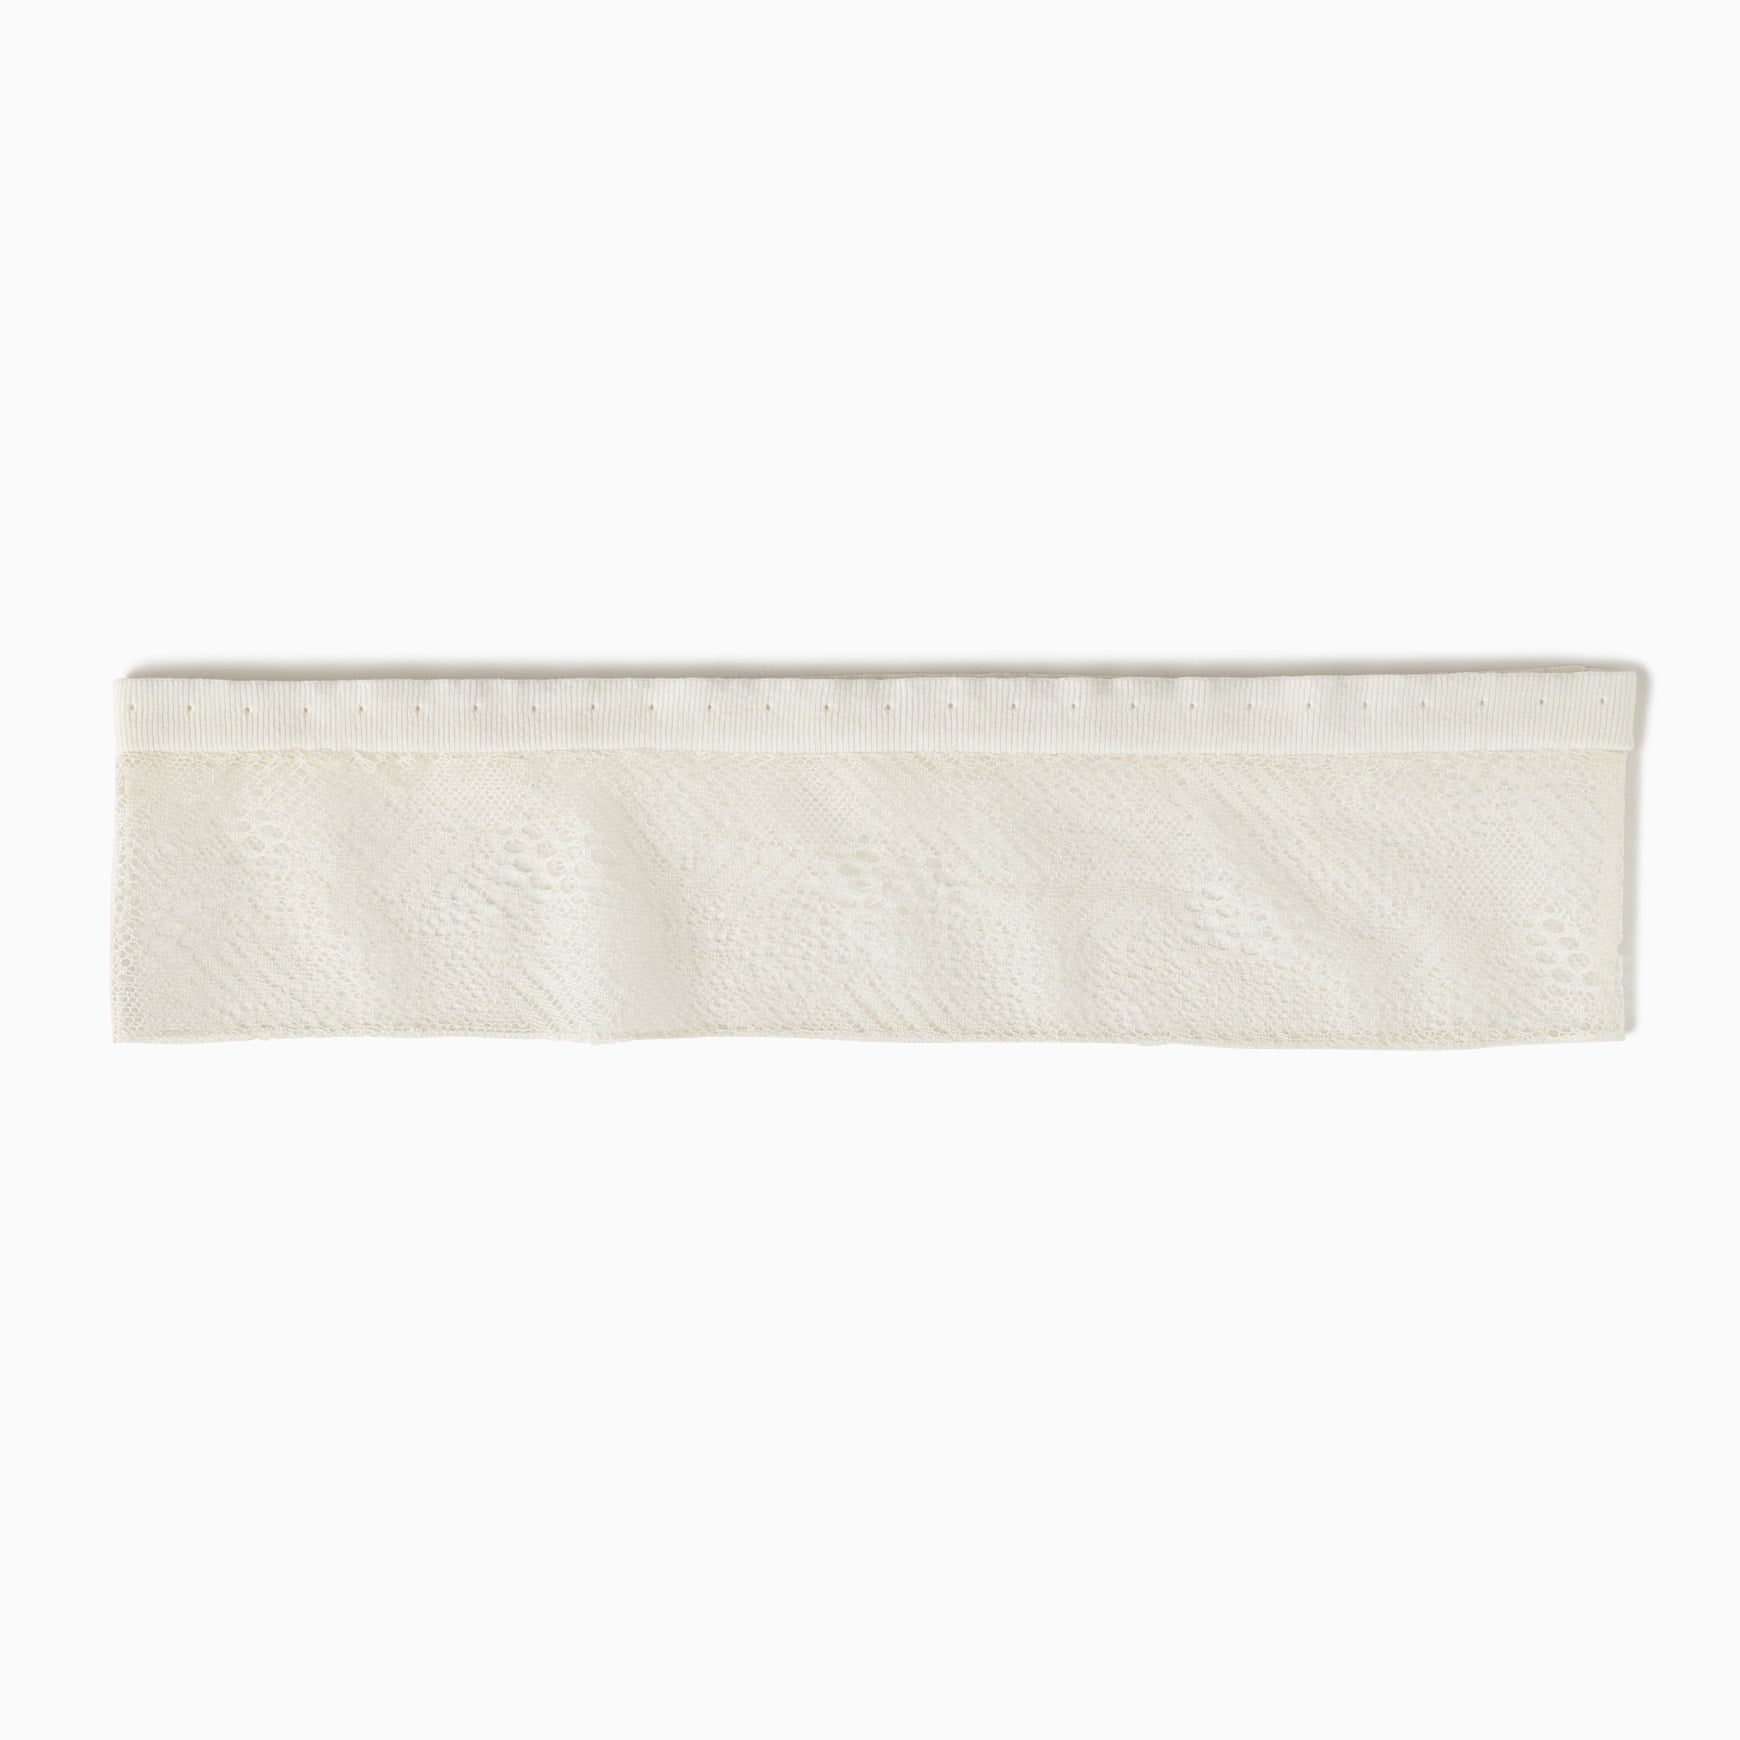 TYPE-1 Knit French Lace Waist Part (White Cells)